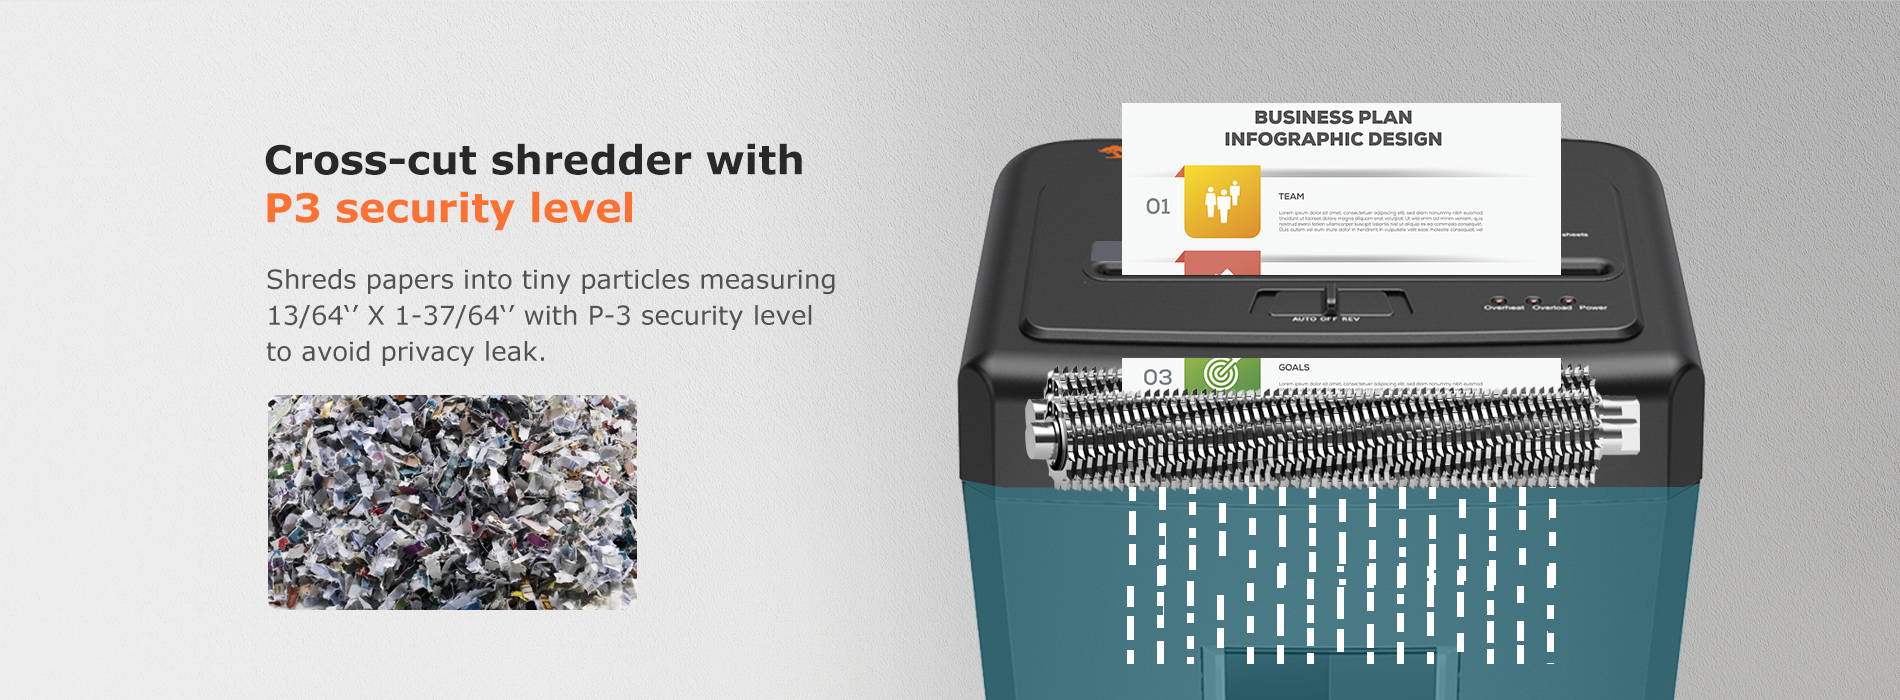 Cross-cut shredder with P3 security level  Shreds papers into tiny particles measuring 13/64'' X 1-37/64'' with P-3 security level to avoid privacy leak.